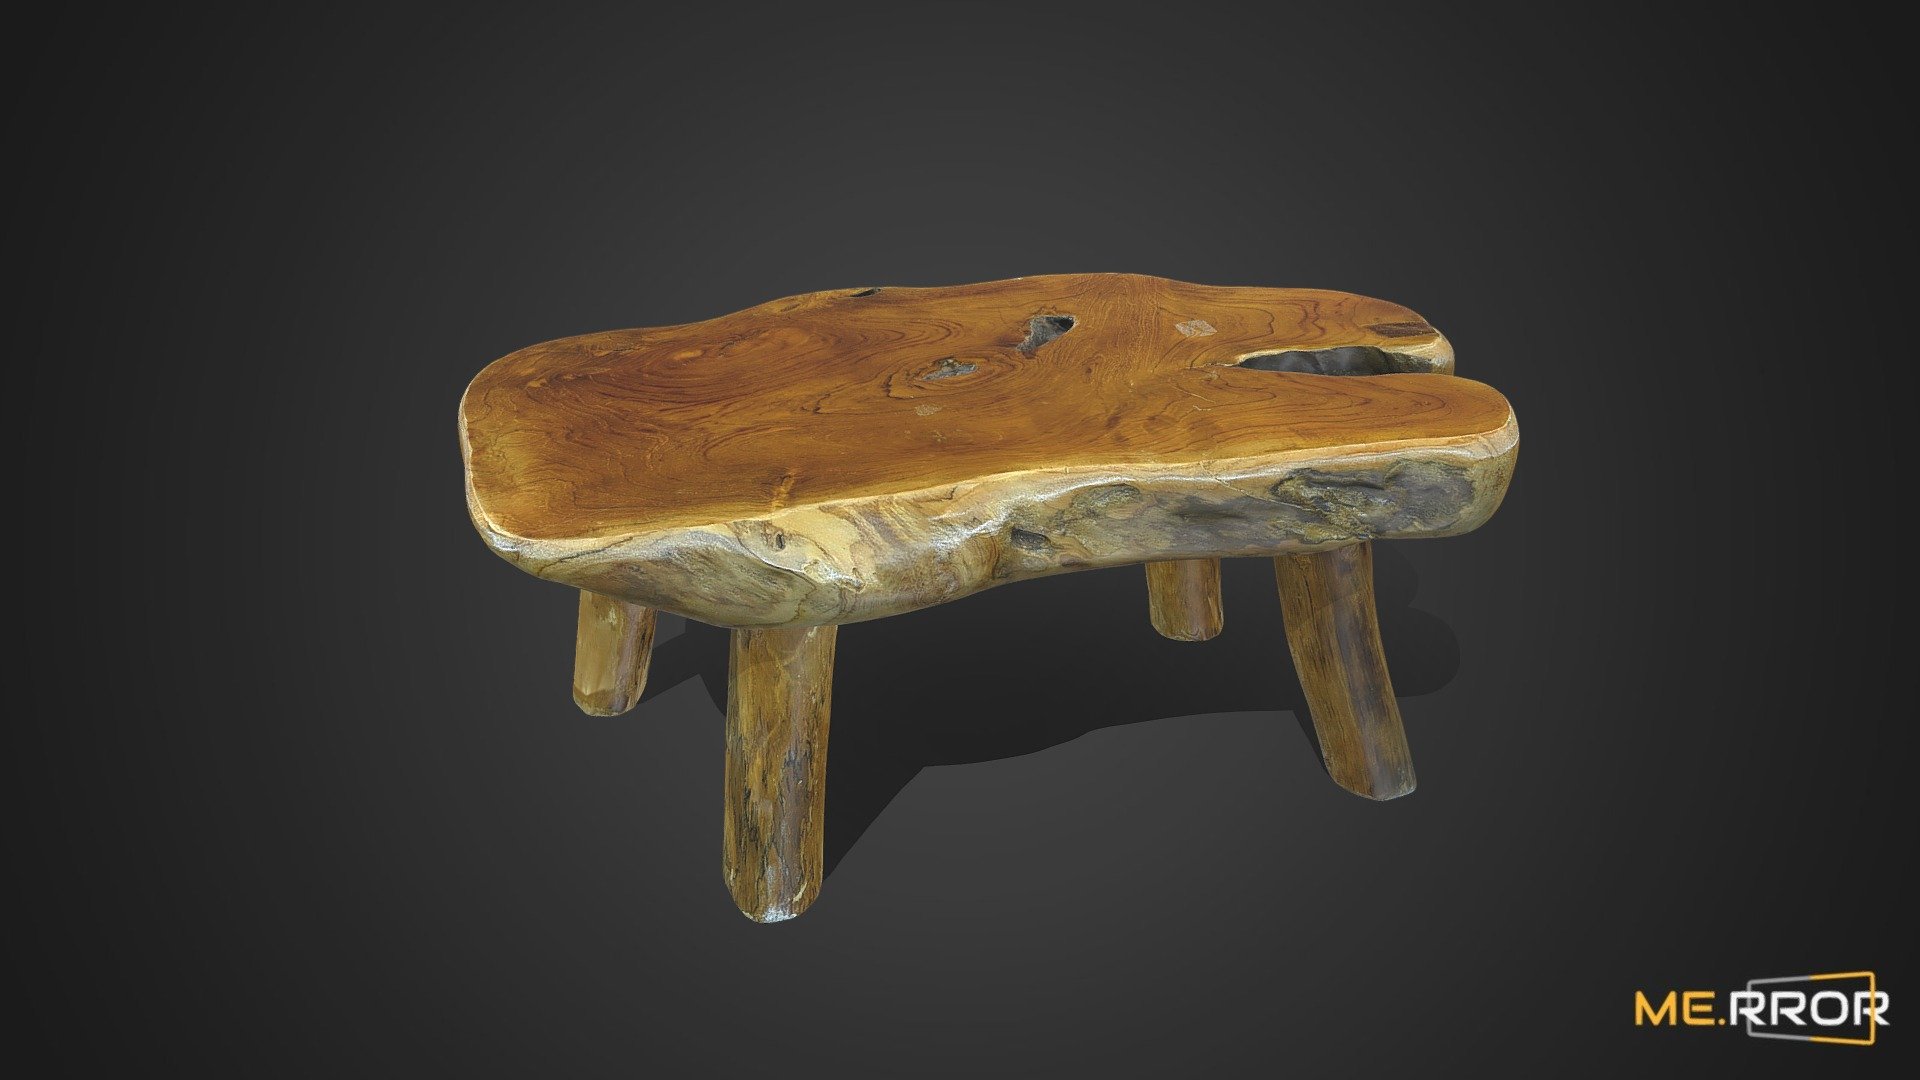 MERROR is a 3D Content PLATFORM which introduces various Asian assets to the 3D world


3DScanning #Photogrametry #ME.RROR - Mini Wood Table - Buy Royalty Free 3D model by ME.RROR Studio (@merror) 3d model